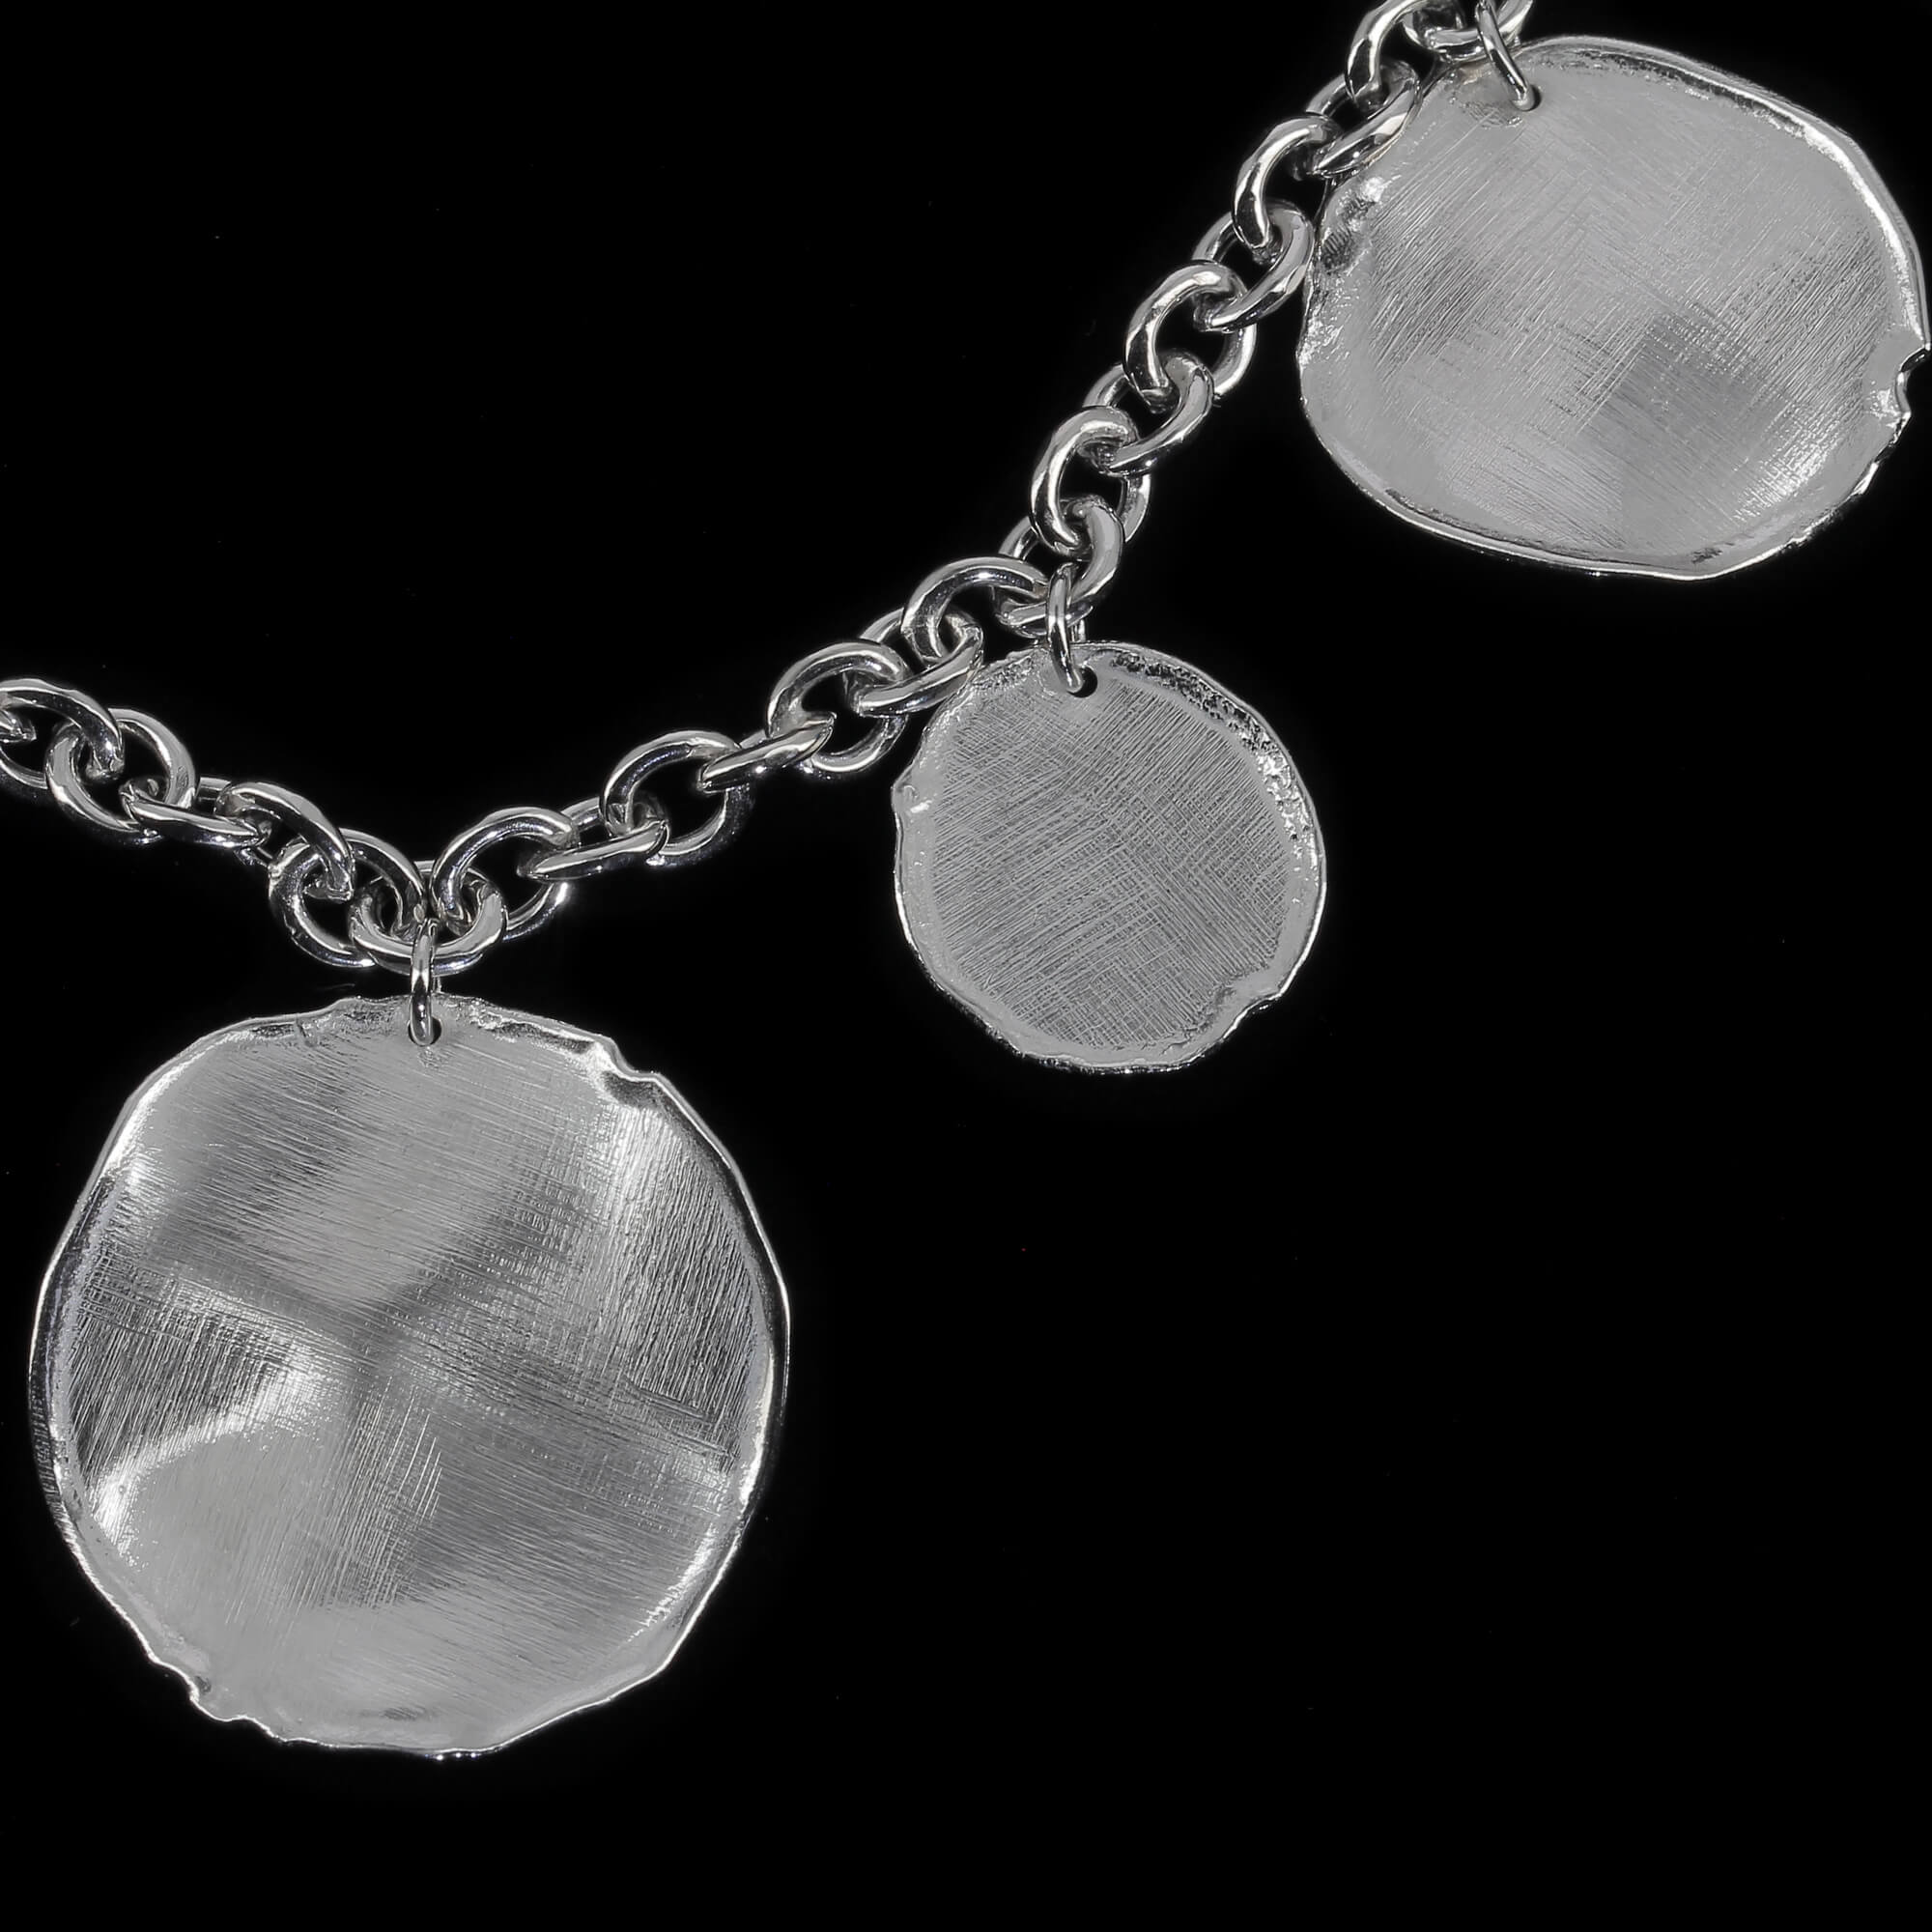 Silver link bracelet with round pendant